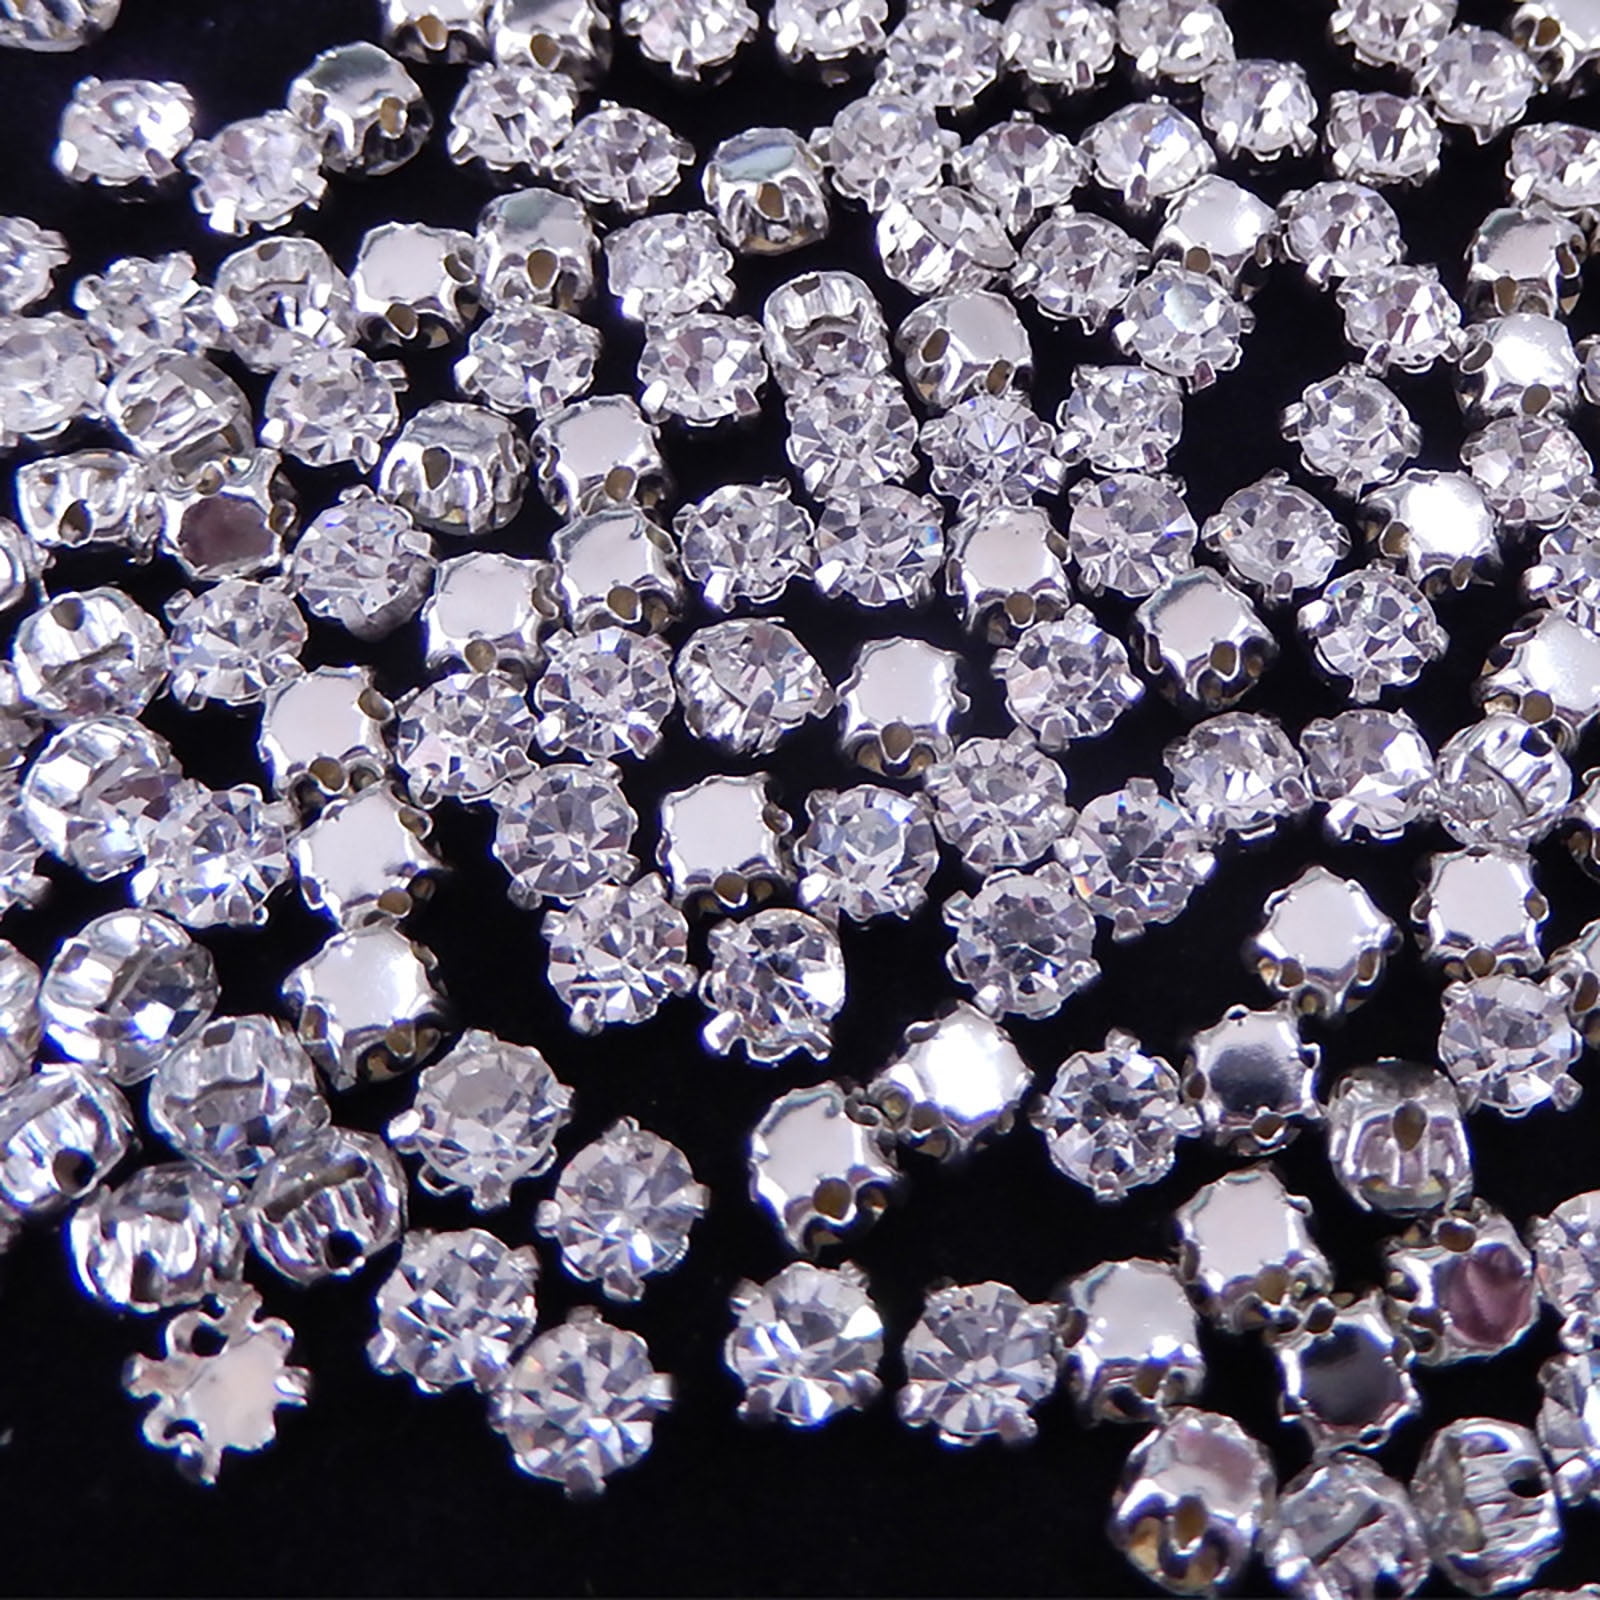 Trimming Shop 3.25mm Sew on Diamante Crystal Clear Glass